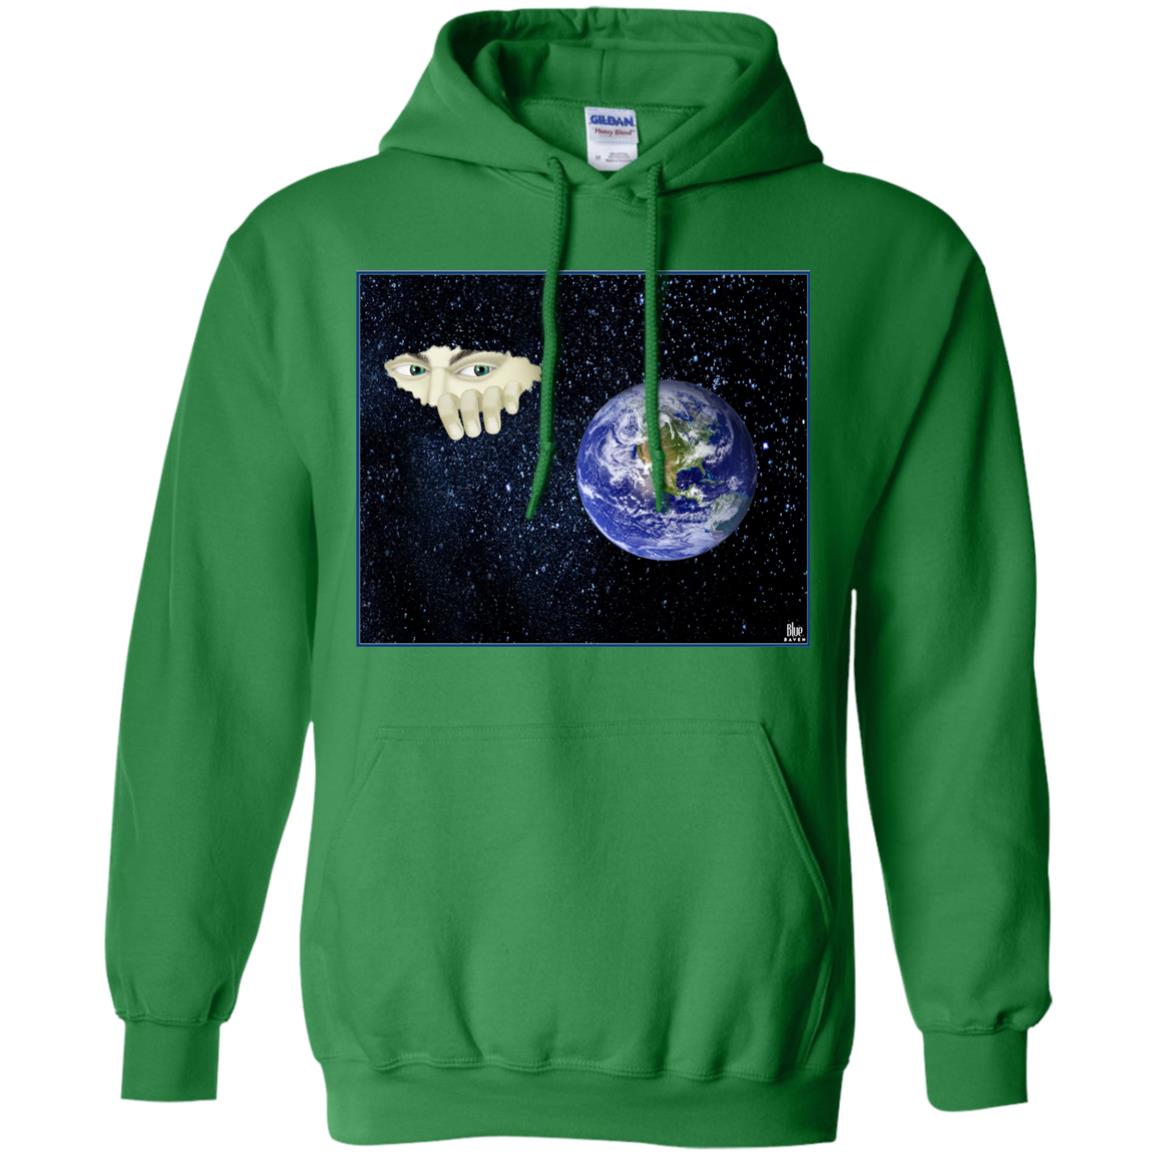 somewhere out there - Adult Hoodie